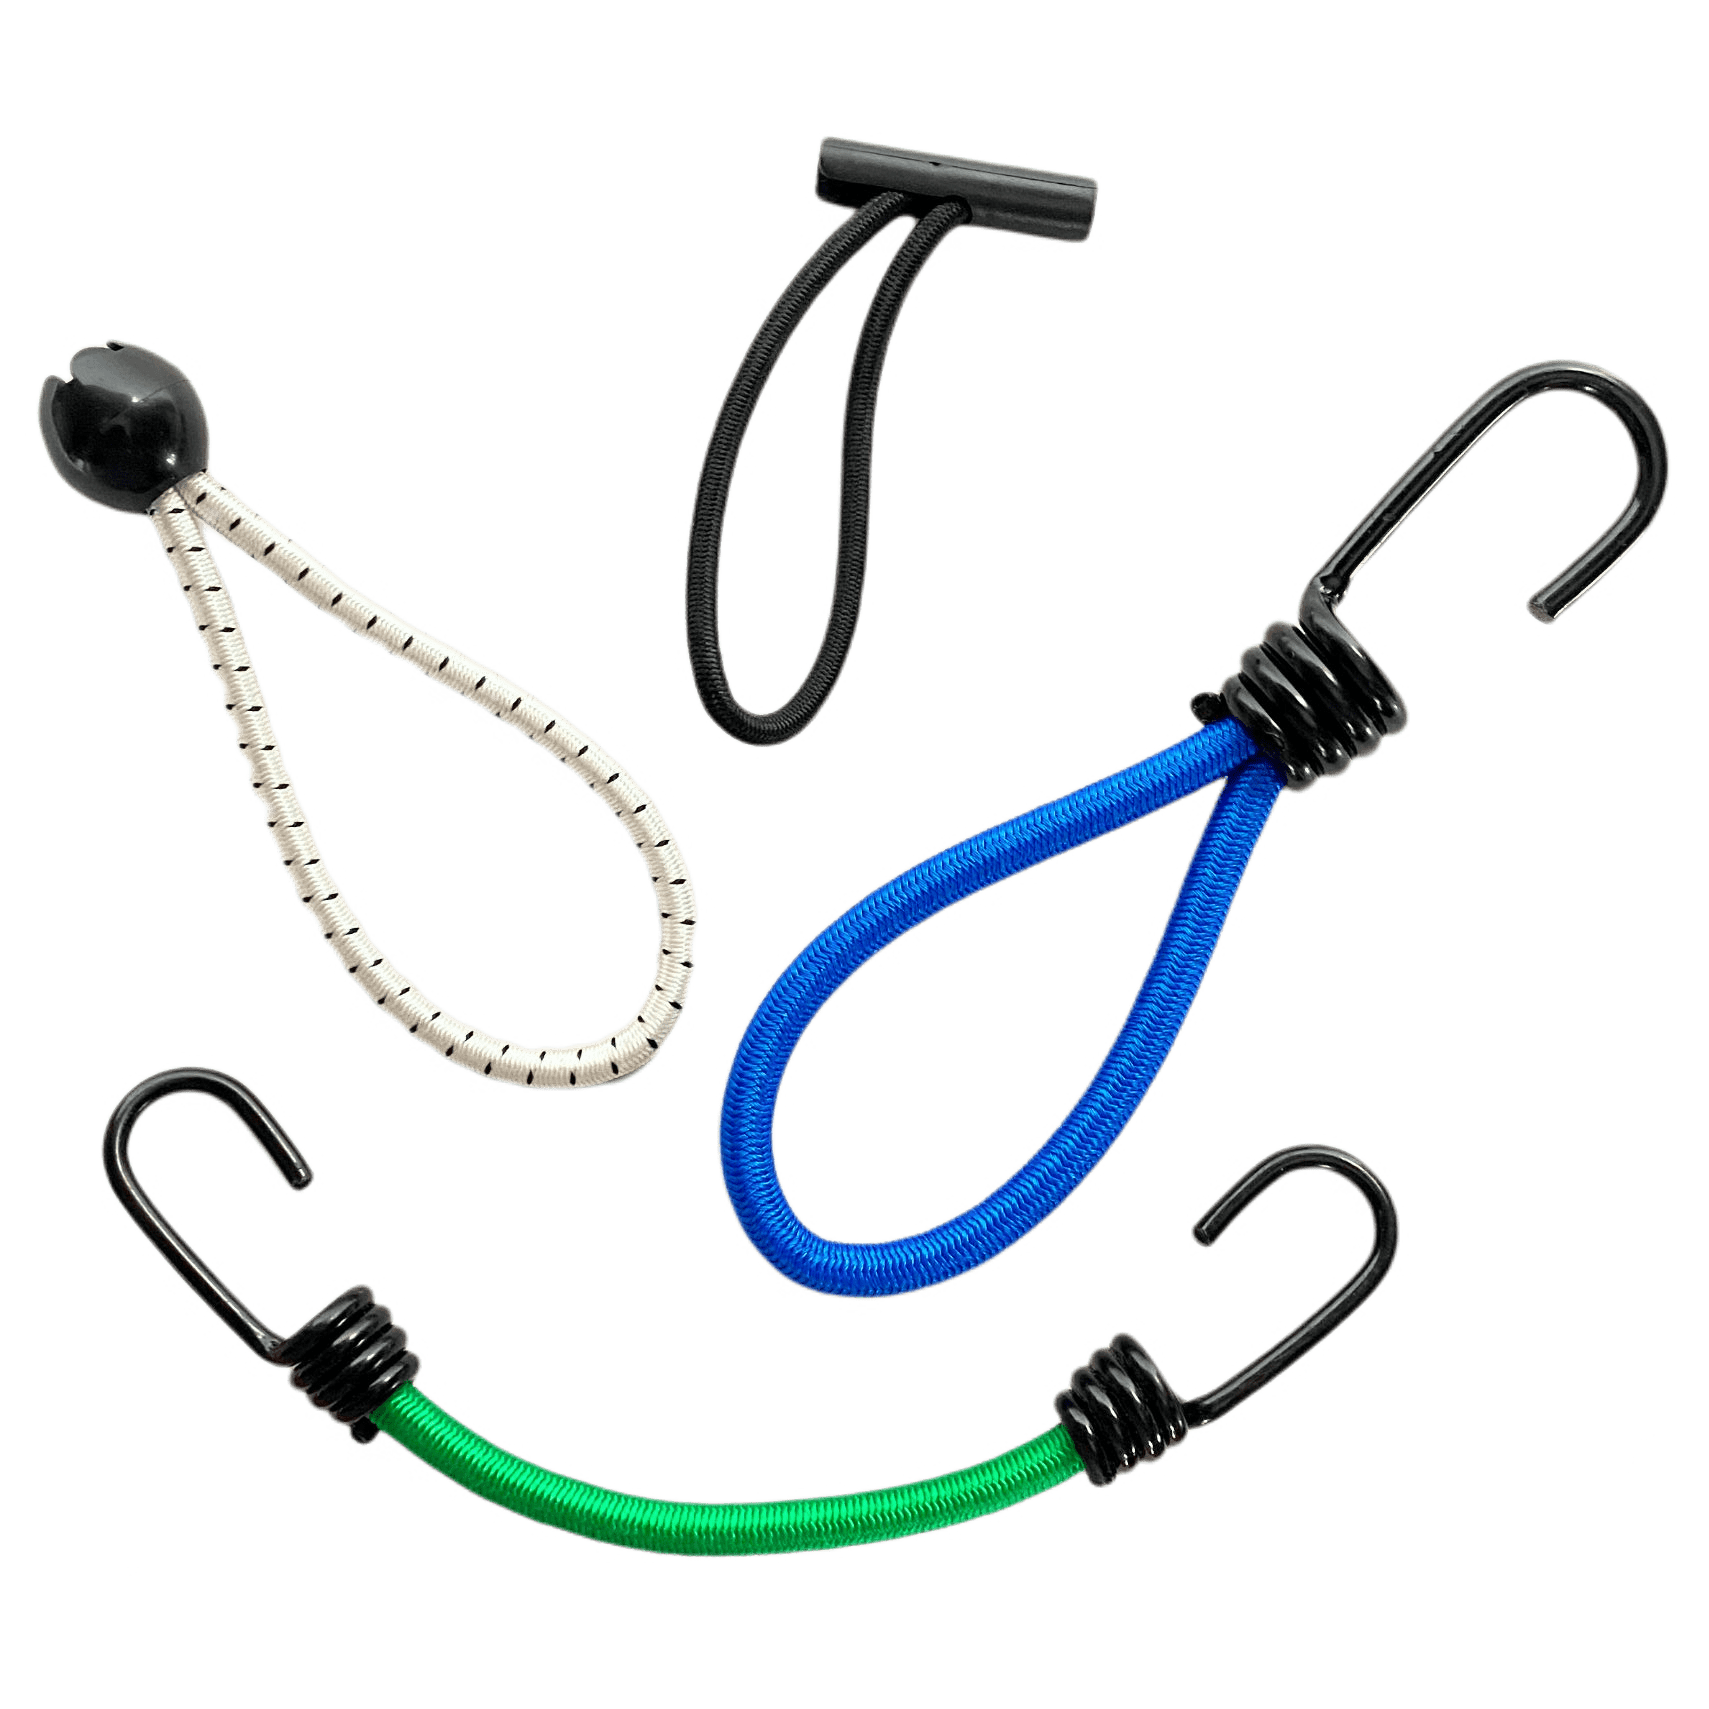 Bungee cords with hook